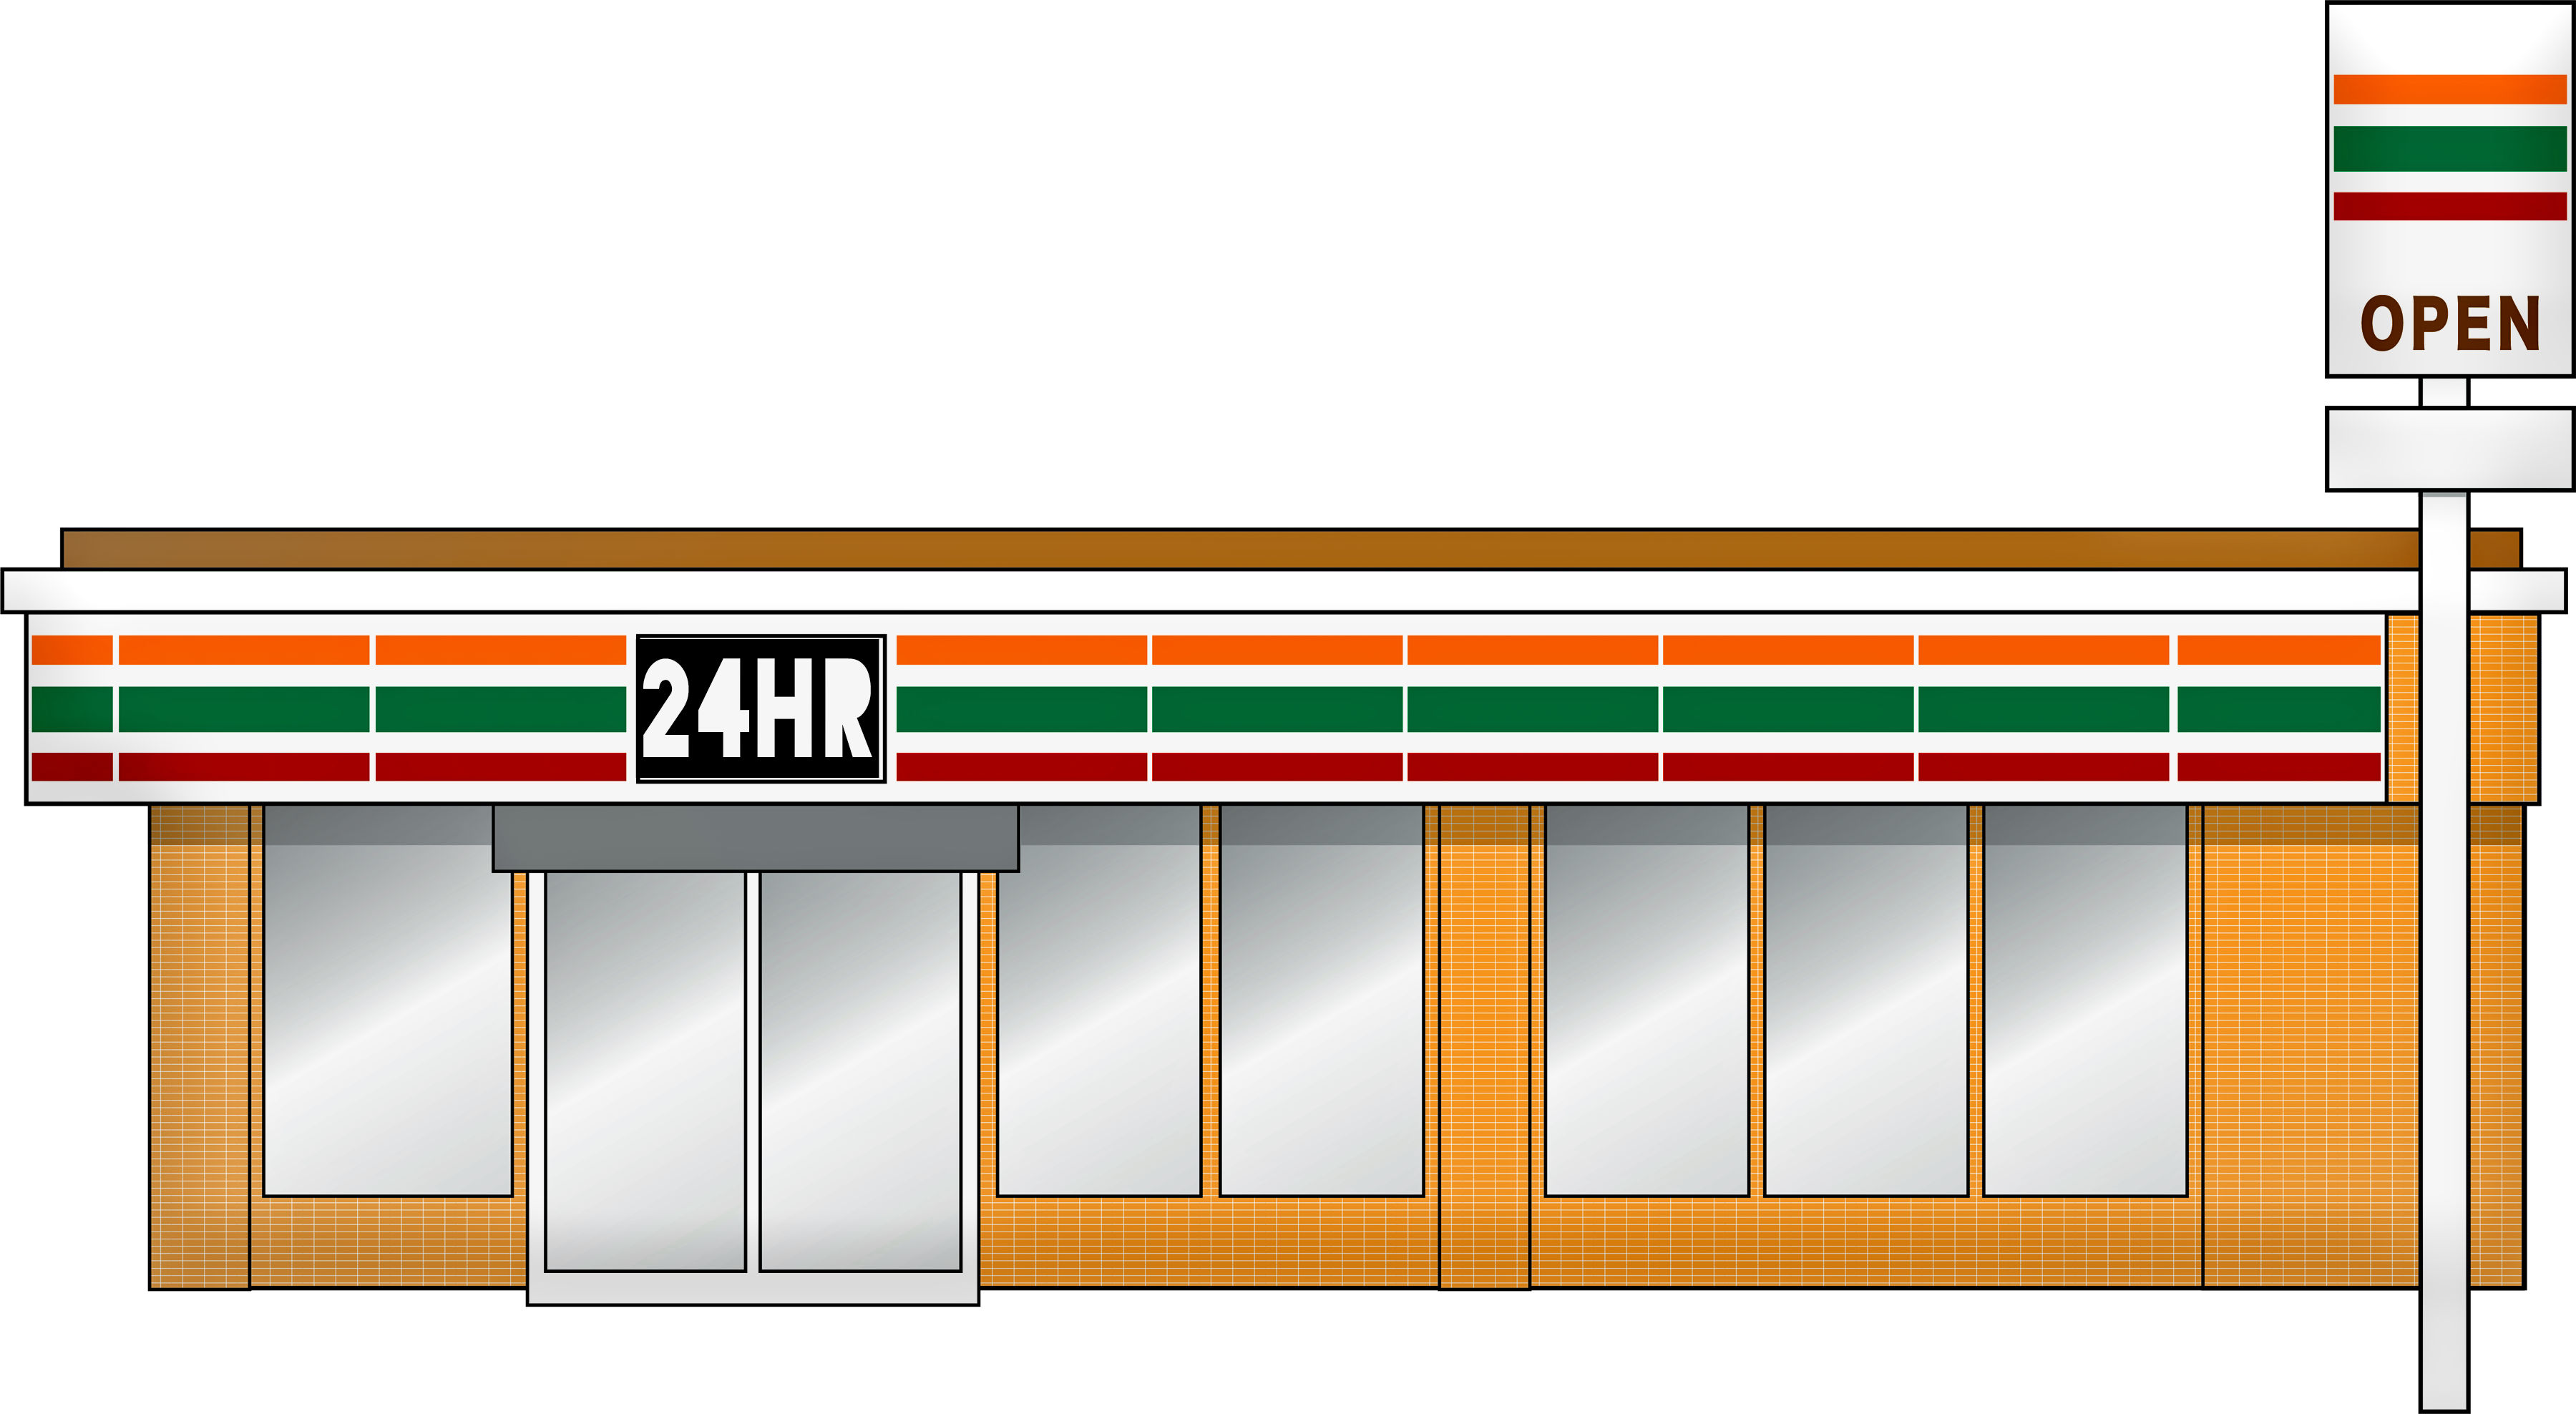 Cartoon image of convenience store